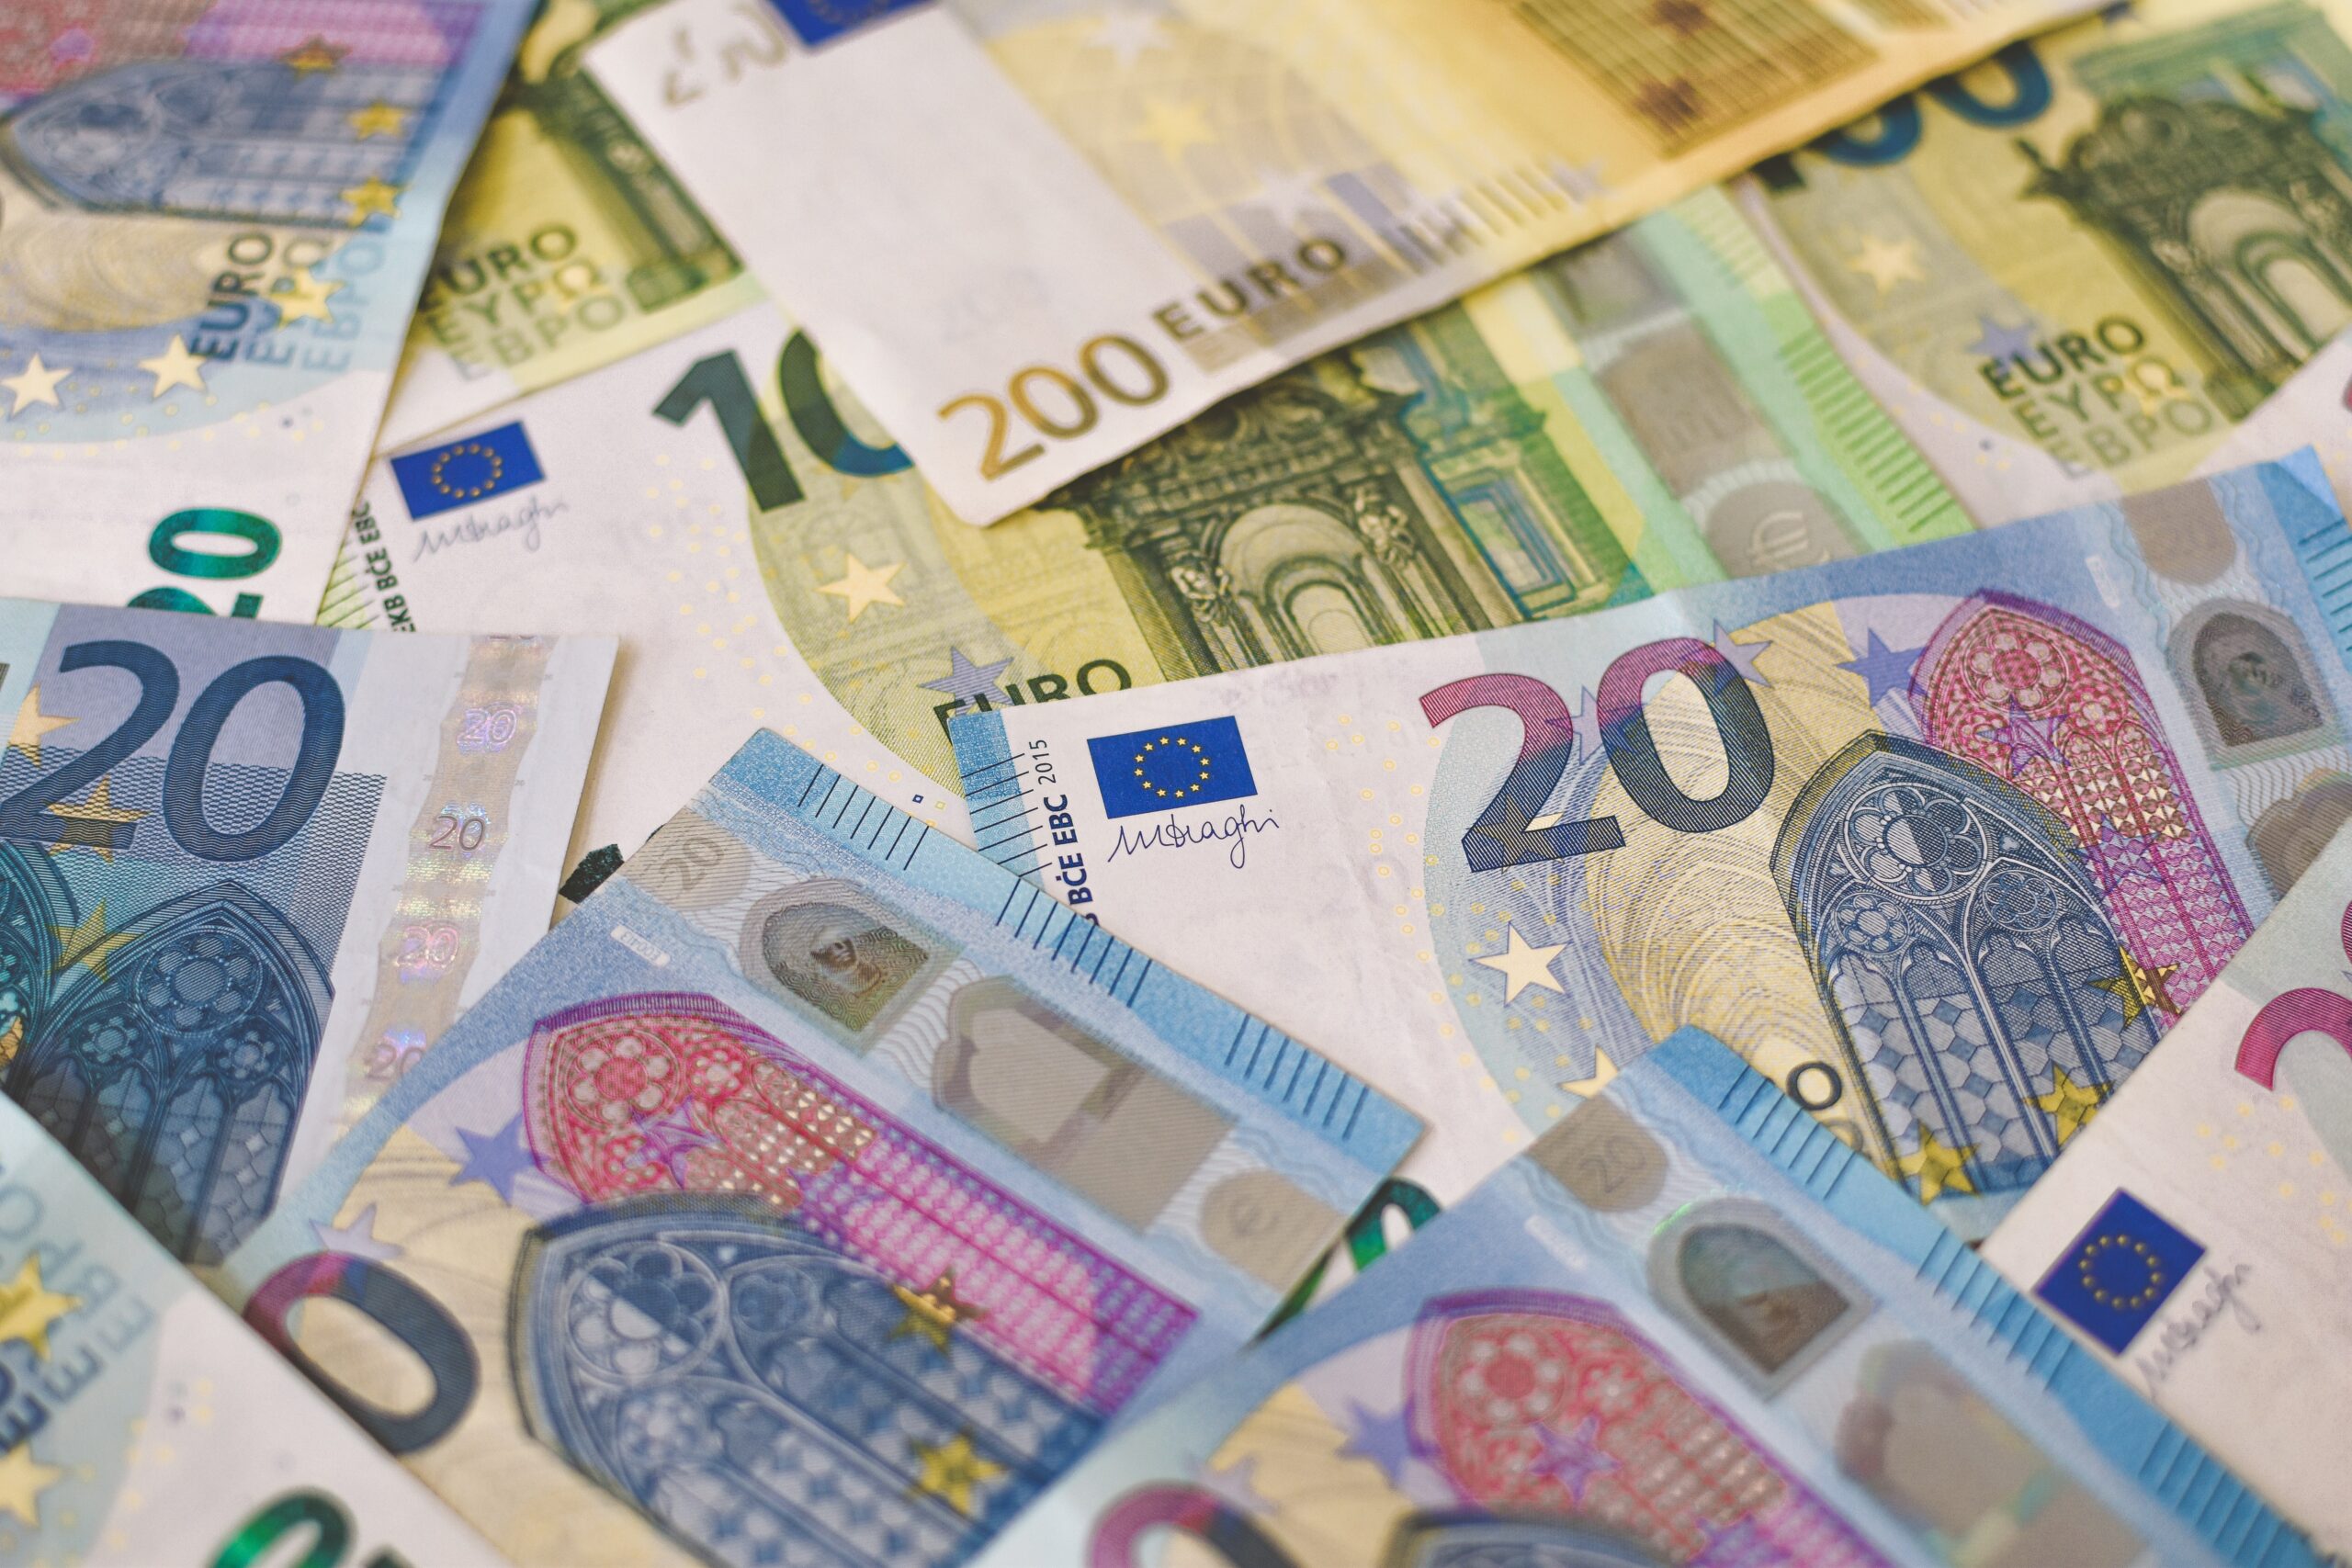 European economists: New fiscal rules will boost investments, but debt will be a challenge.